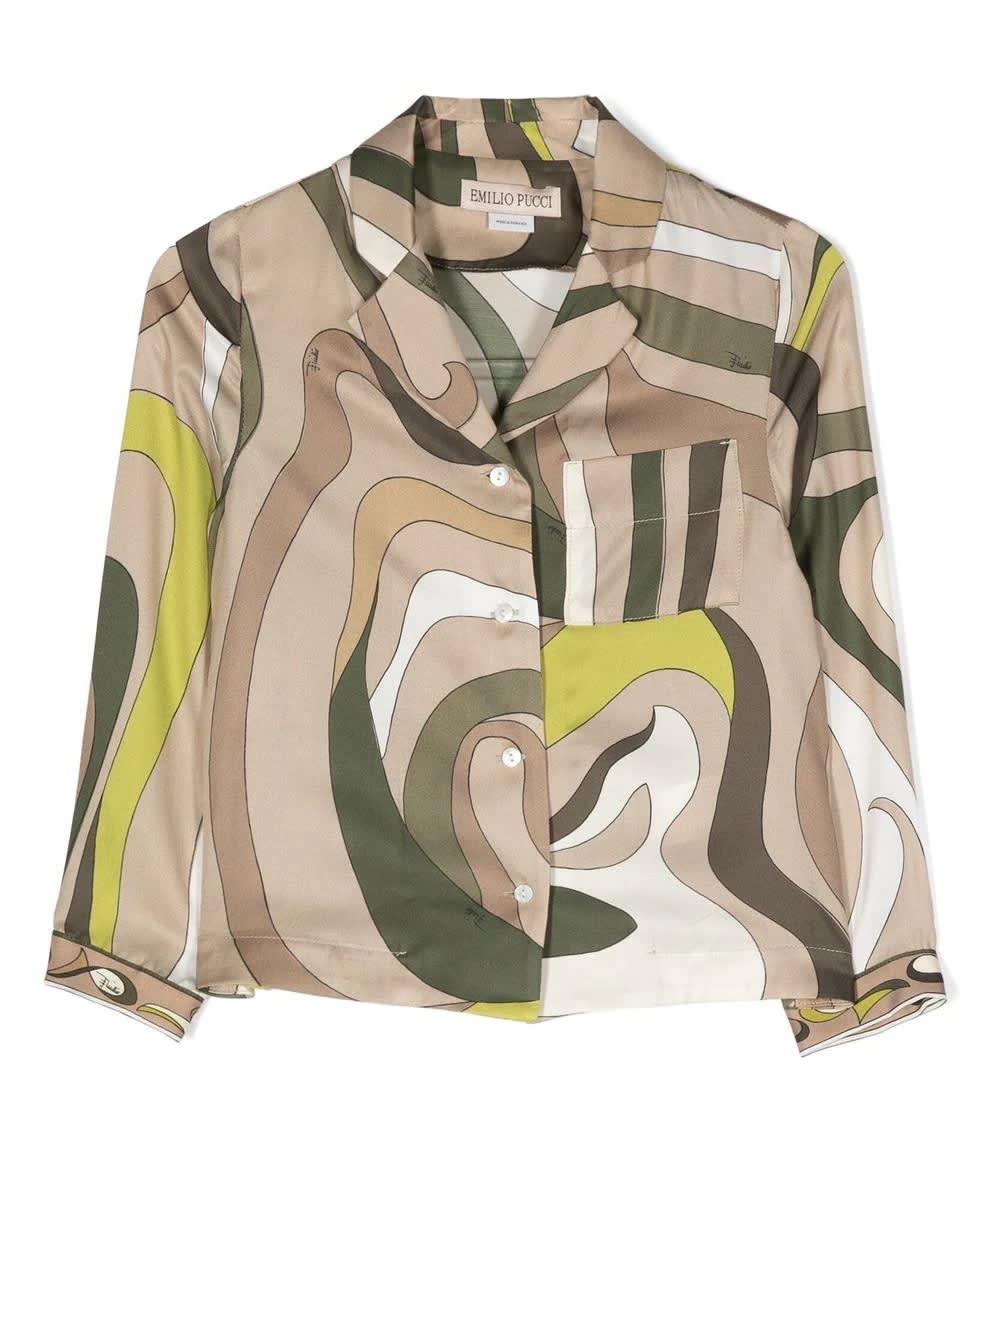 EMILIO PUCCI BEIGE SHIRT WITH MARBLE PRINT